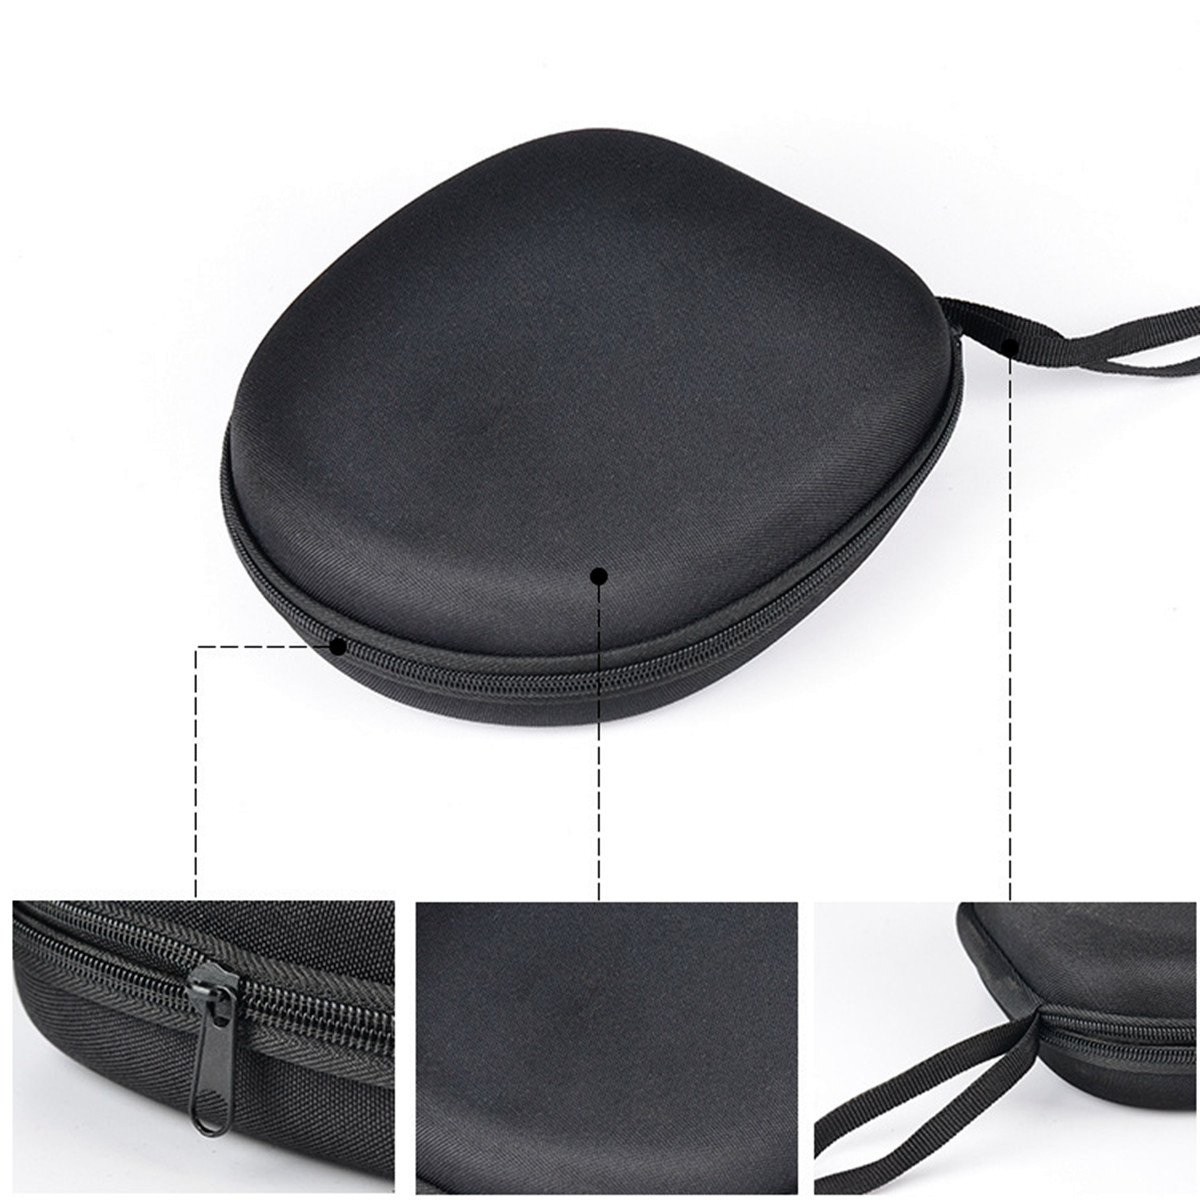 Bakeey-Universal-Portable-Carrying-Earphone-Shockproof-Protective-Case-Storage-Bag-Pouch-for-Sony-QC-1643522-3